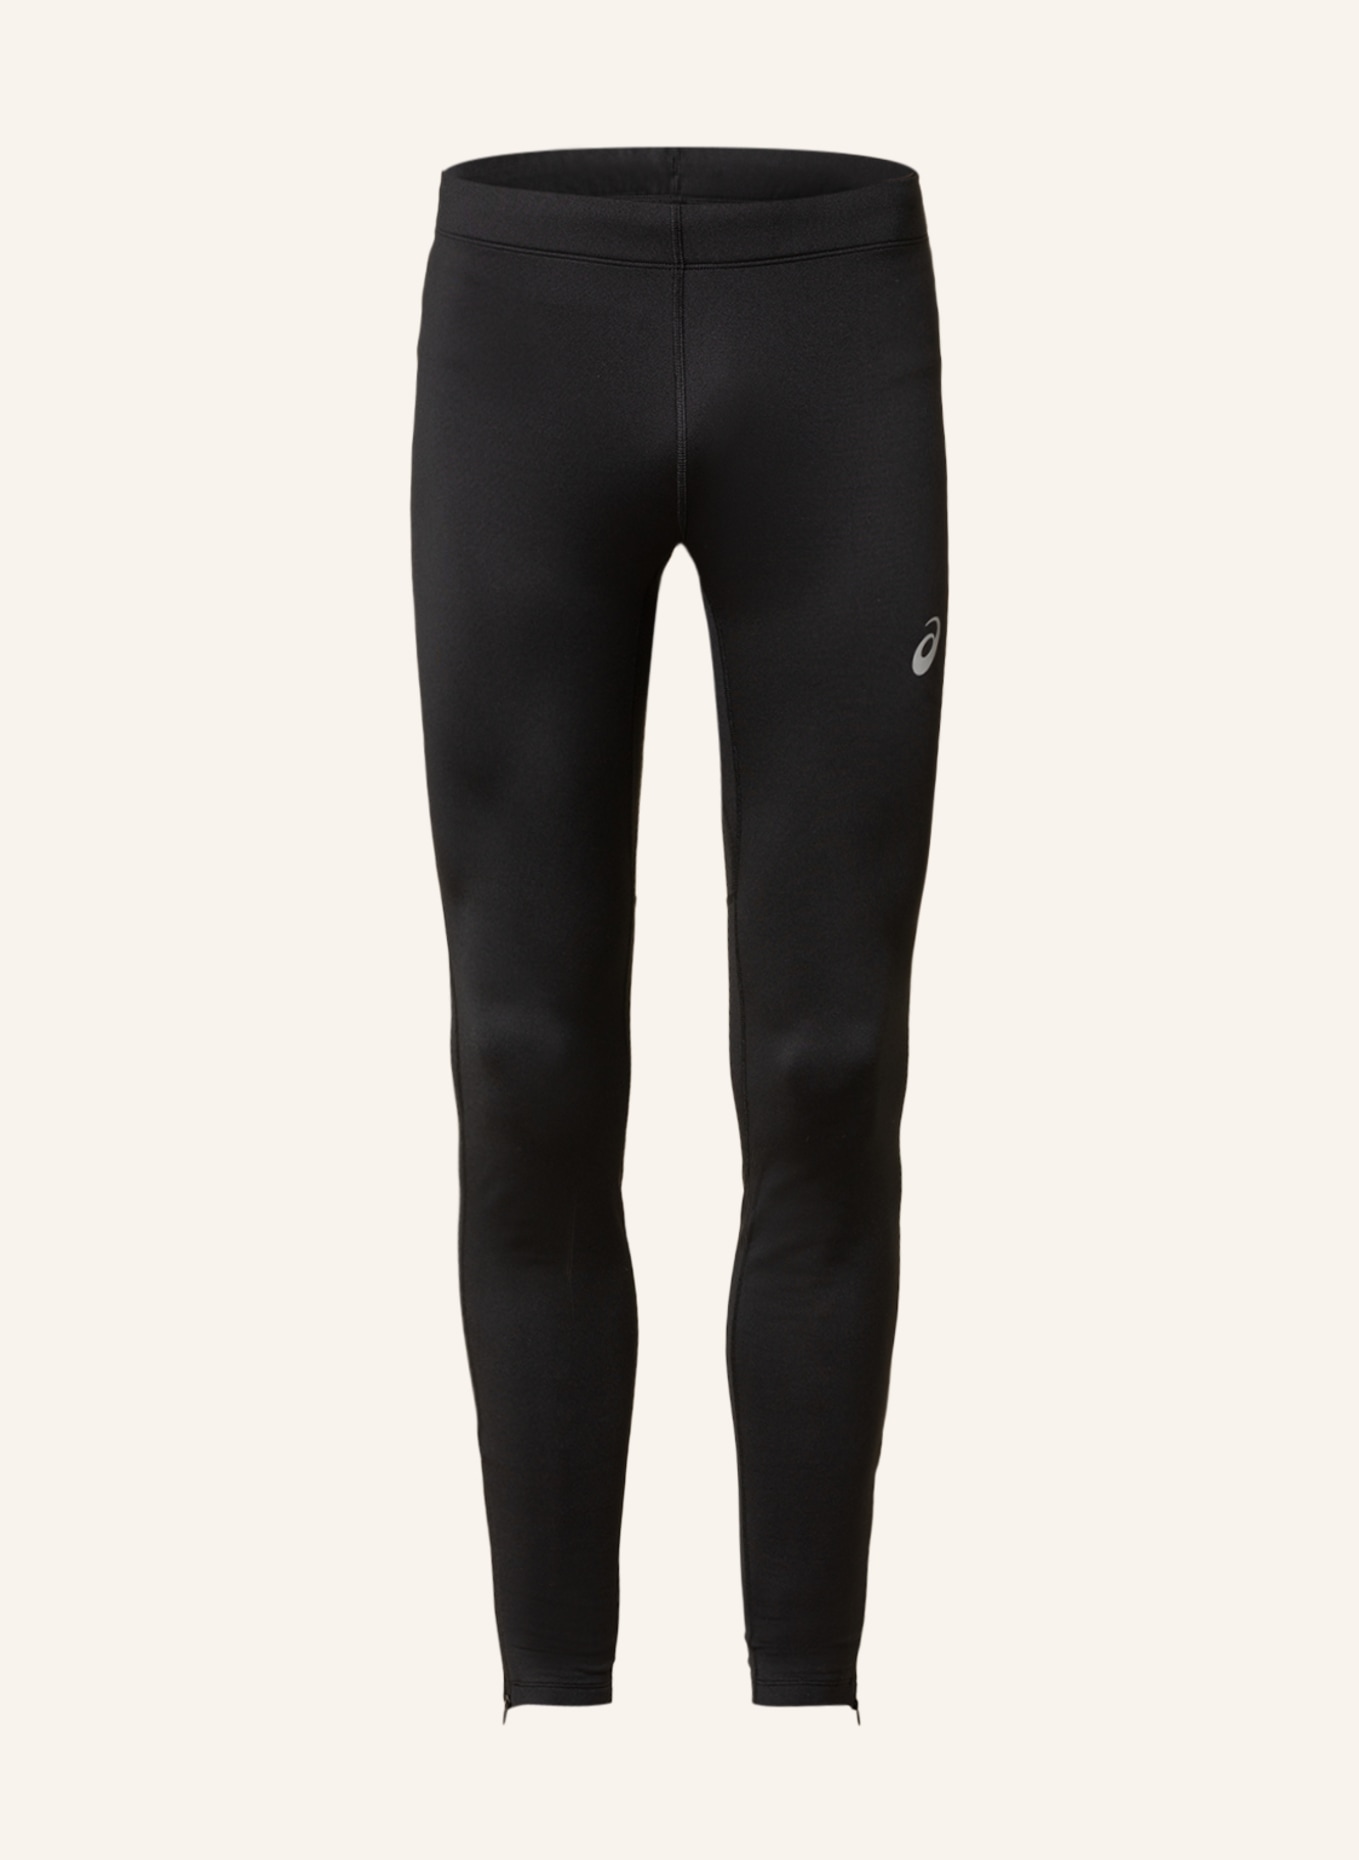 ASICS Running trousers CORE WINTER black in TIGHT